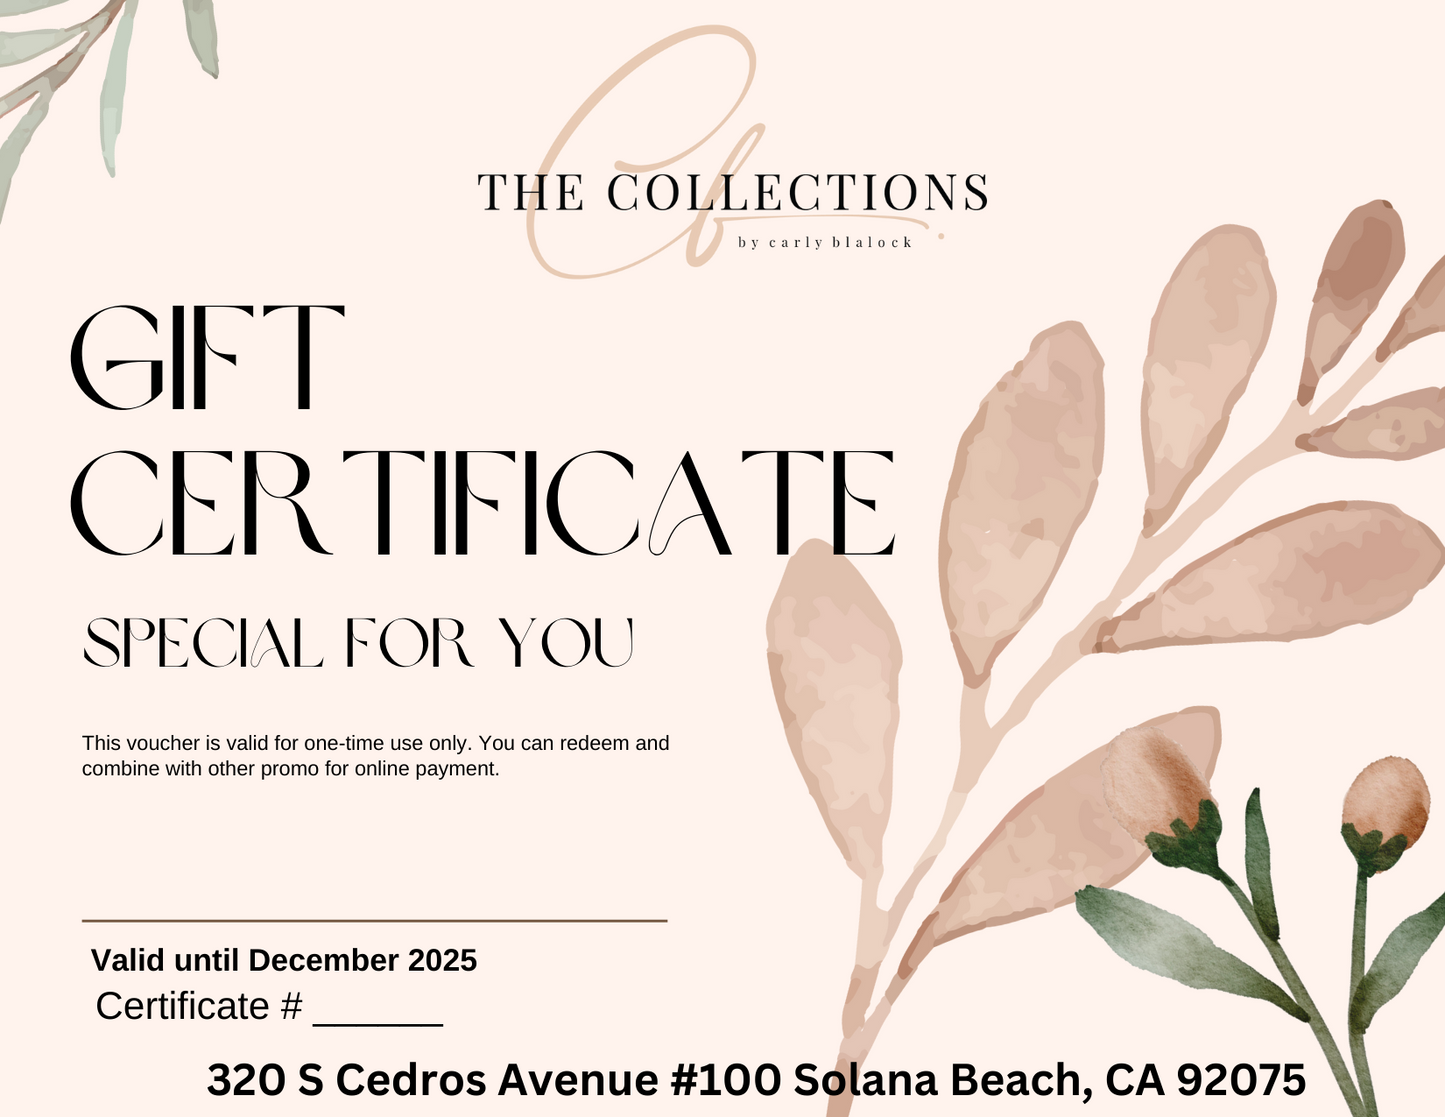 Gift Certificate "THE COLLECTIONS"